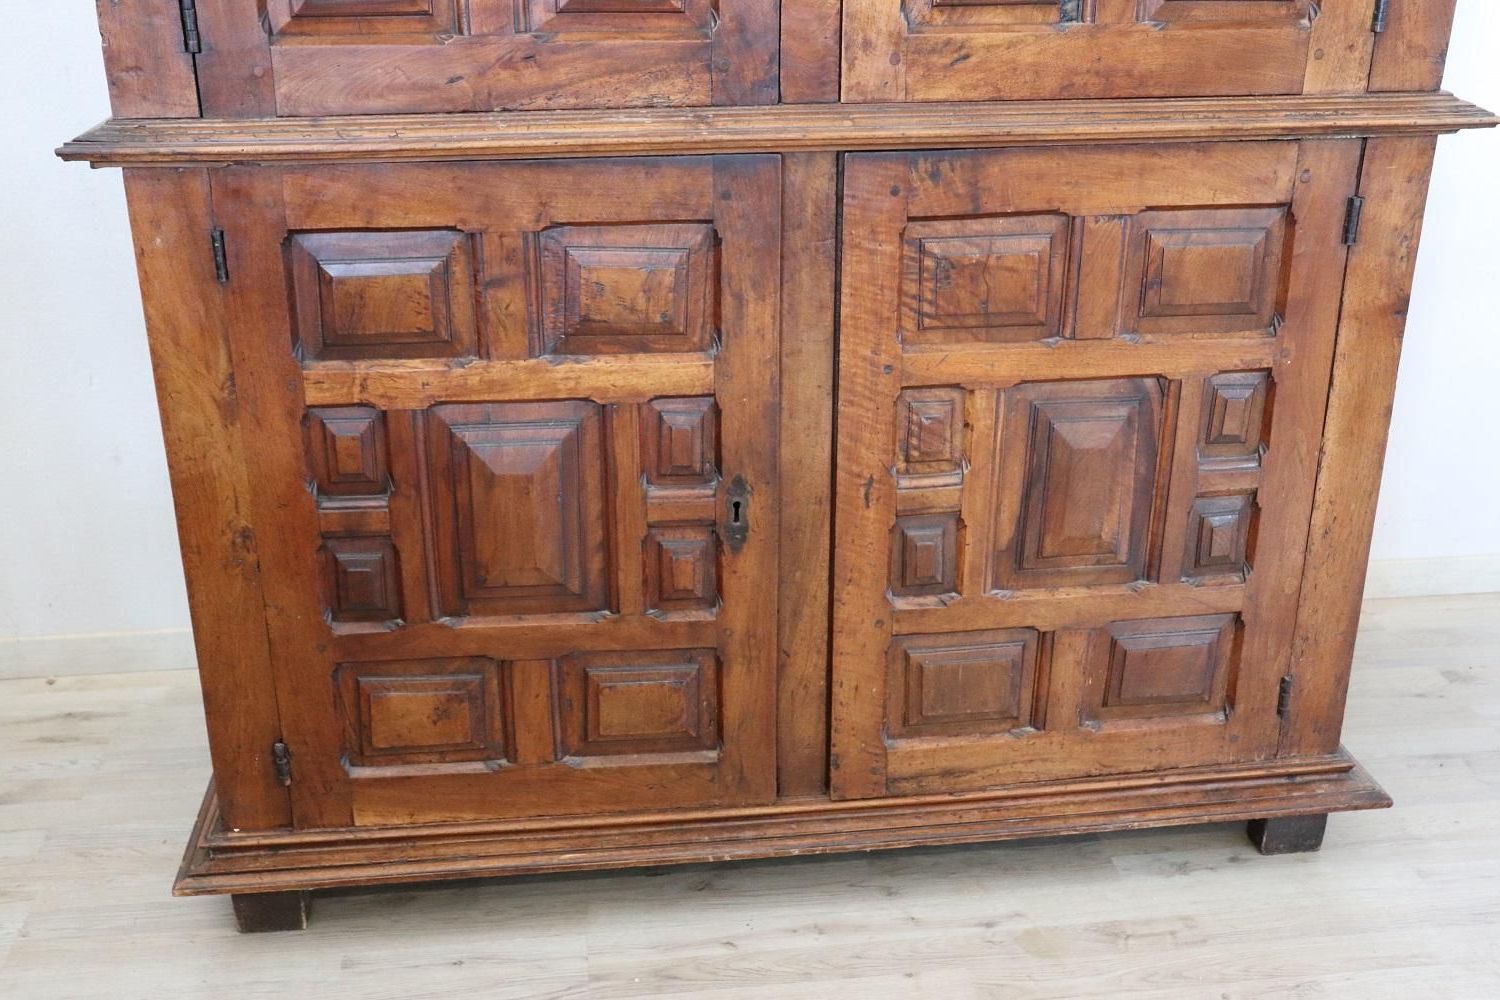 Imposing Antique Wardrobe Or Pantry In Solid Walnut, Early 18th Century |  Grand Vintage With Regard To Antique Wardrobes (View 9 of 20)